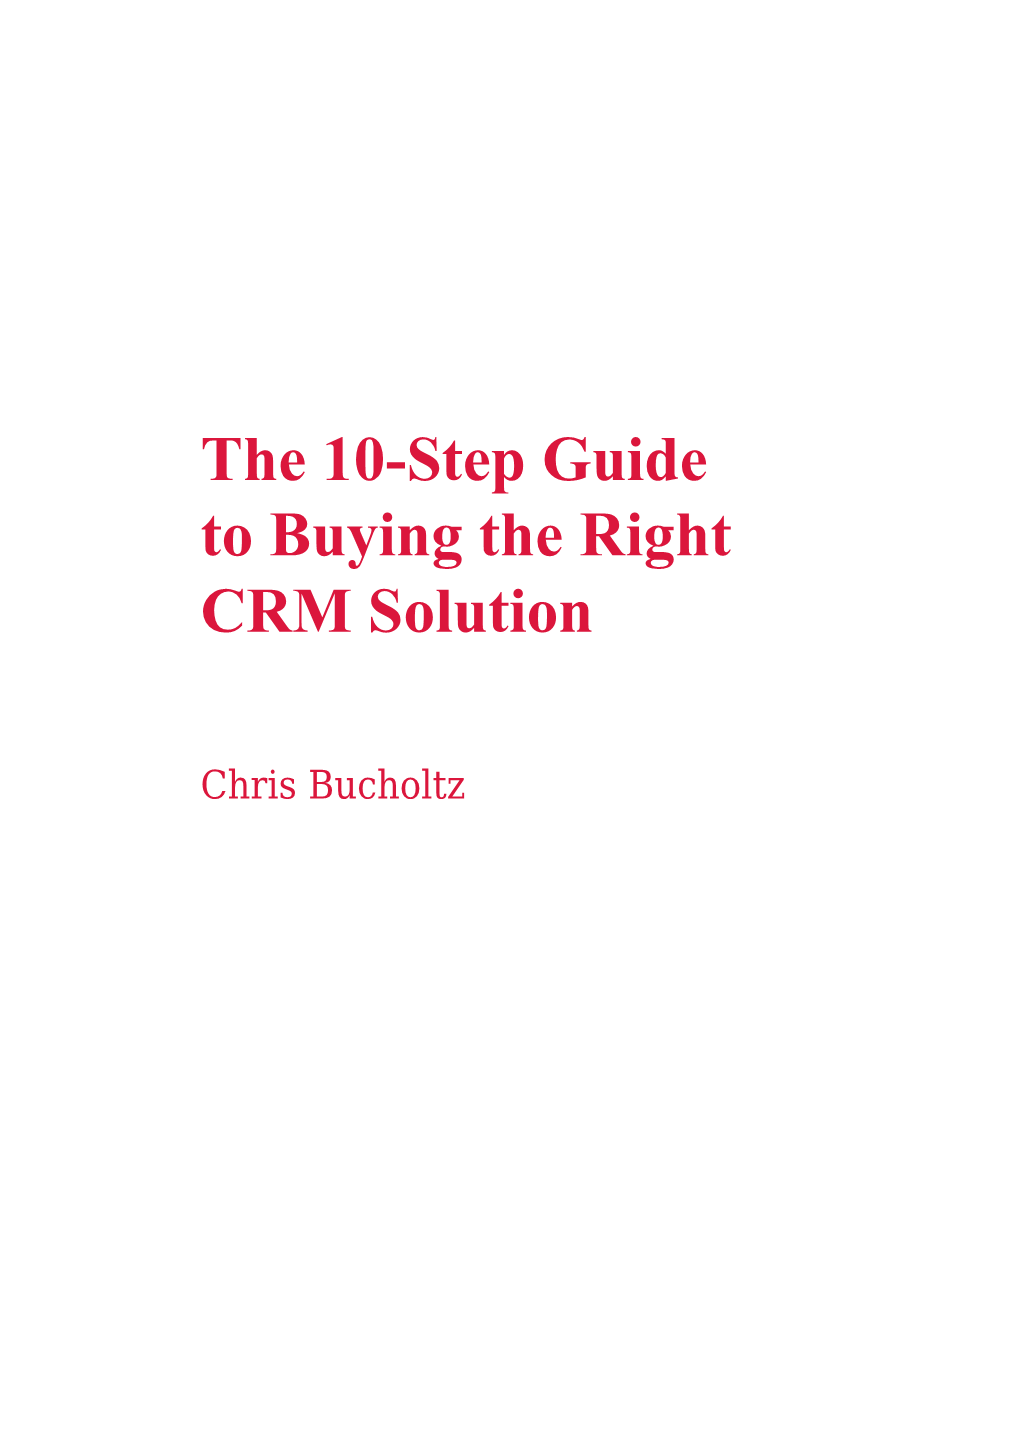 The 10-Step Guide